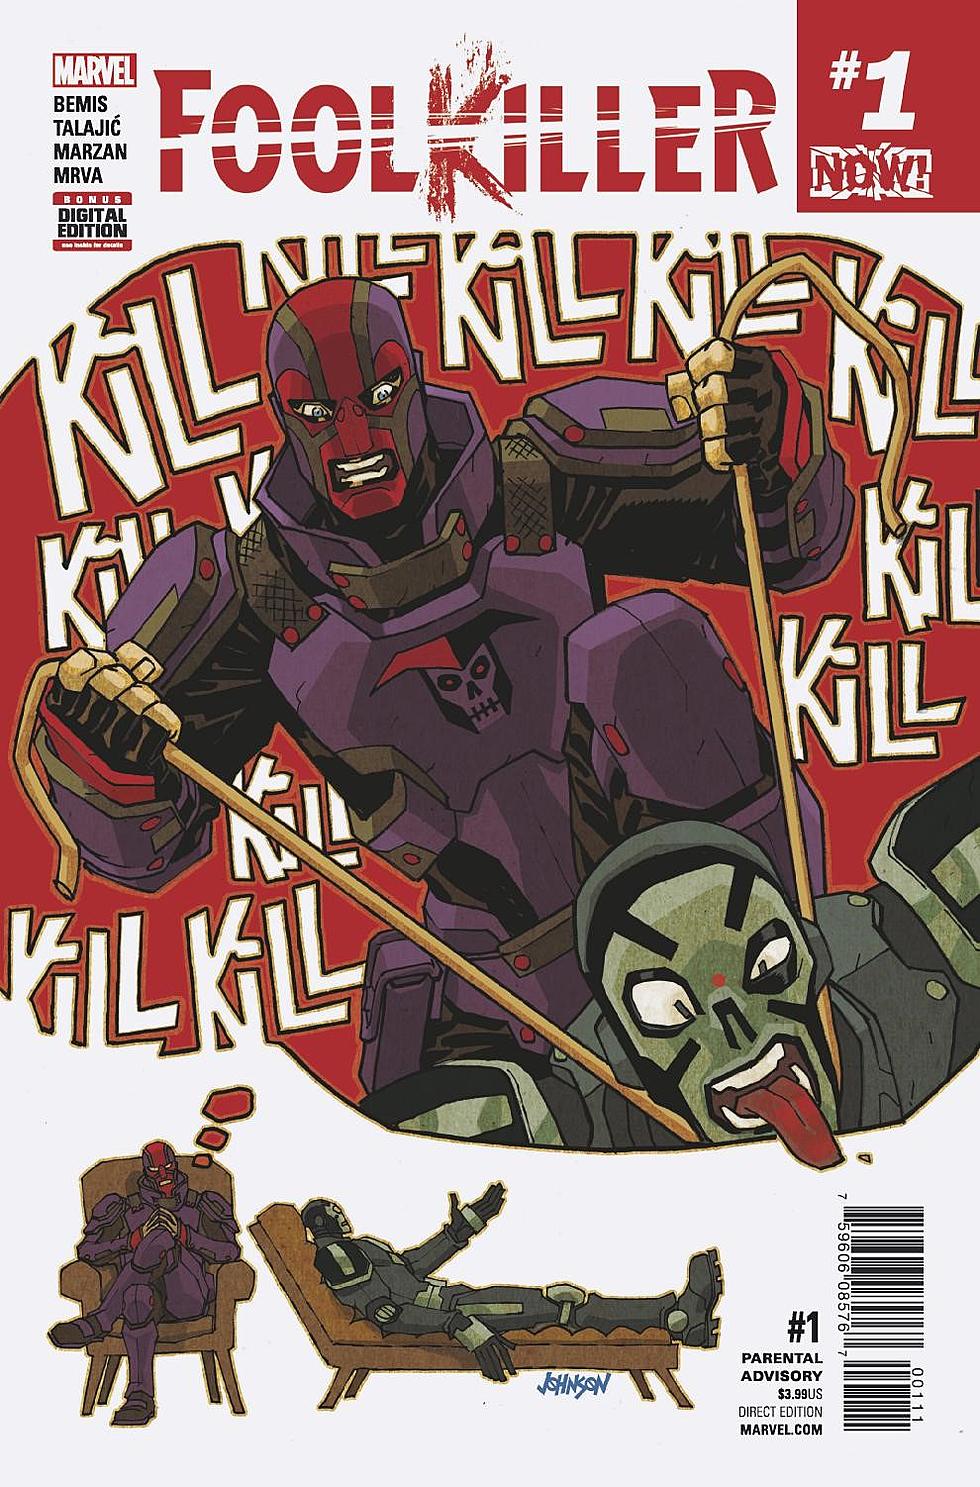 The Doctor Is Insane In Bemis And Talajic&#8217;s &#8216;Foolkiller&#8217; #1 [Preview]